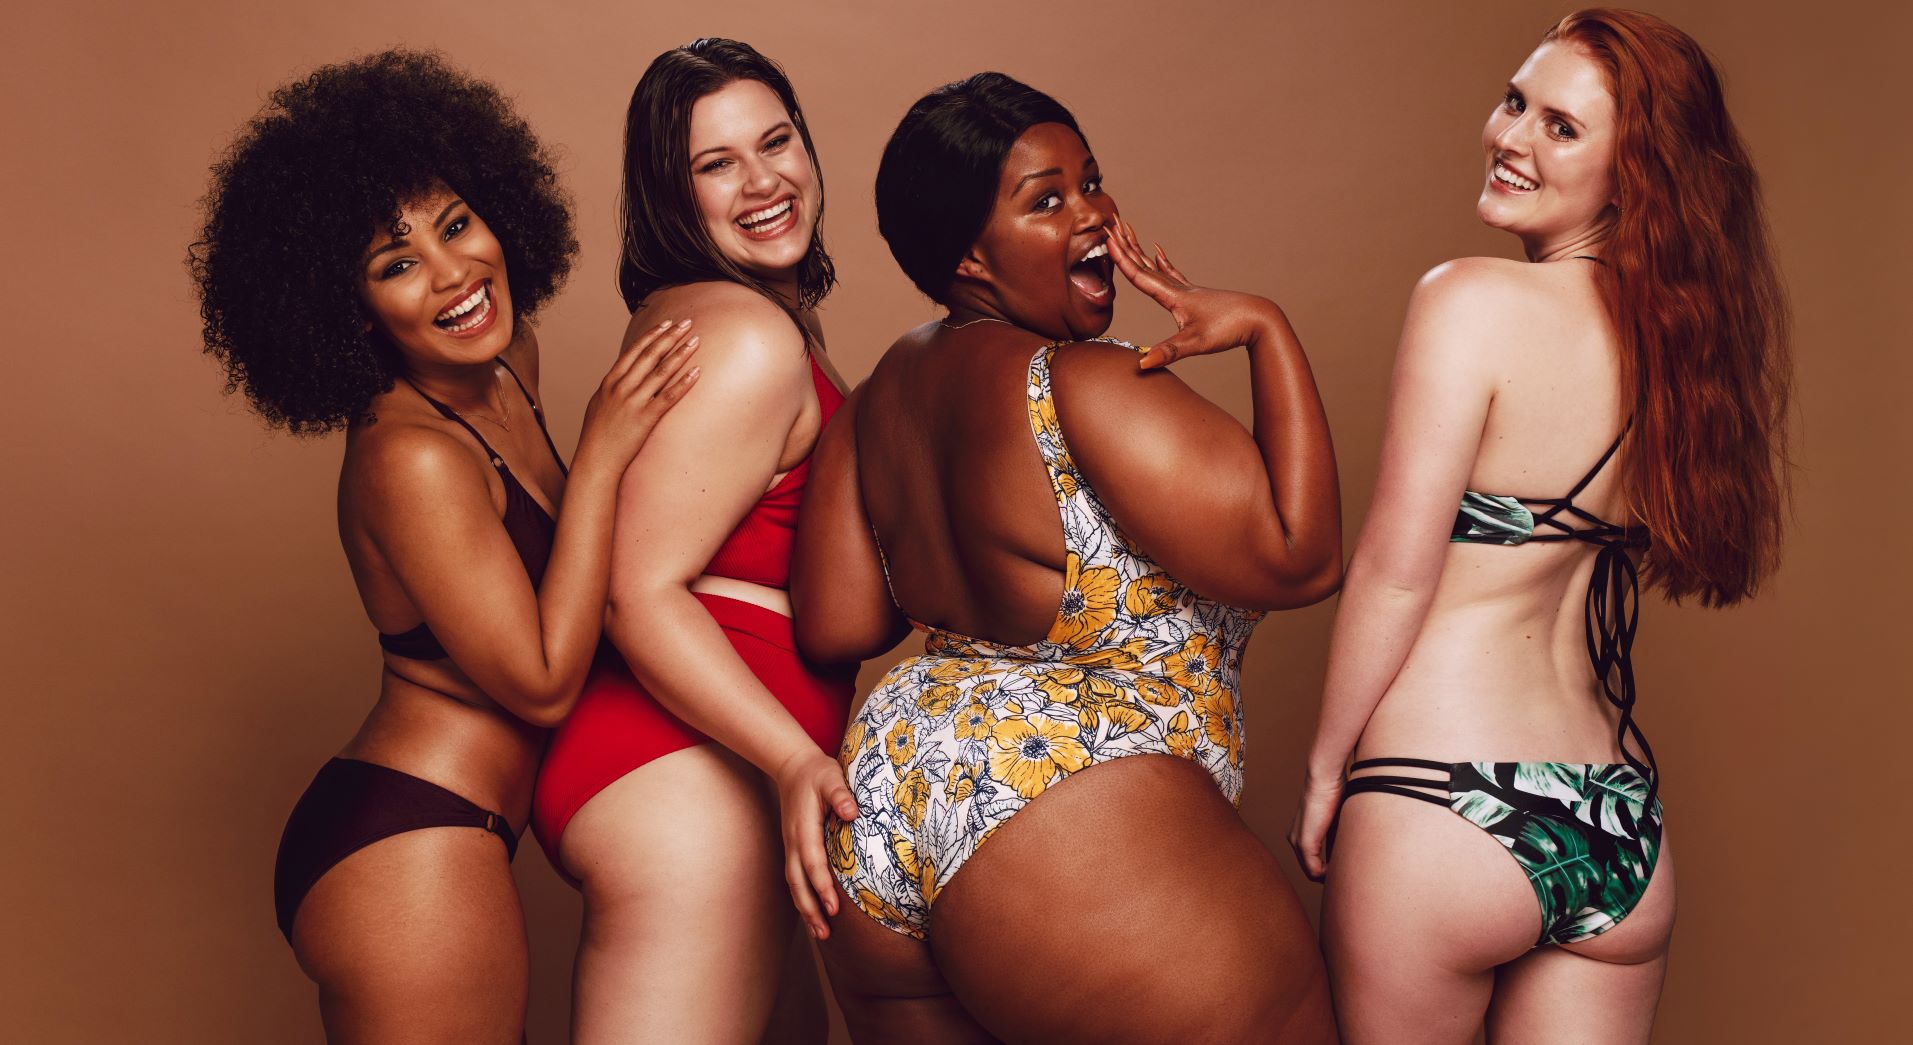 Amazon Has the Cutest Swimwear on Sale for Prime Day So You Can Stock Up for Summer